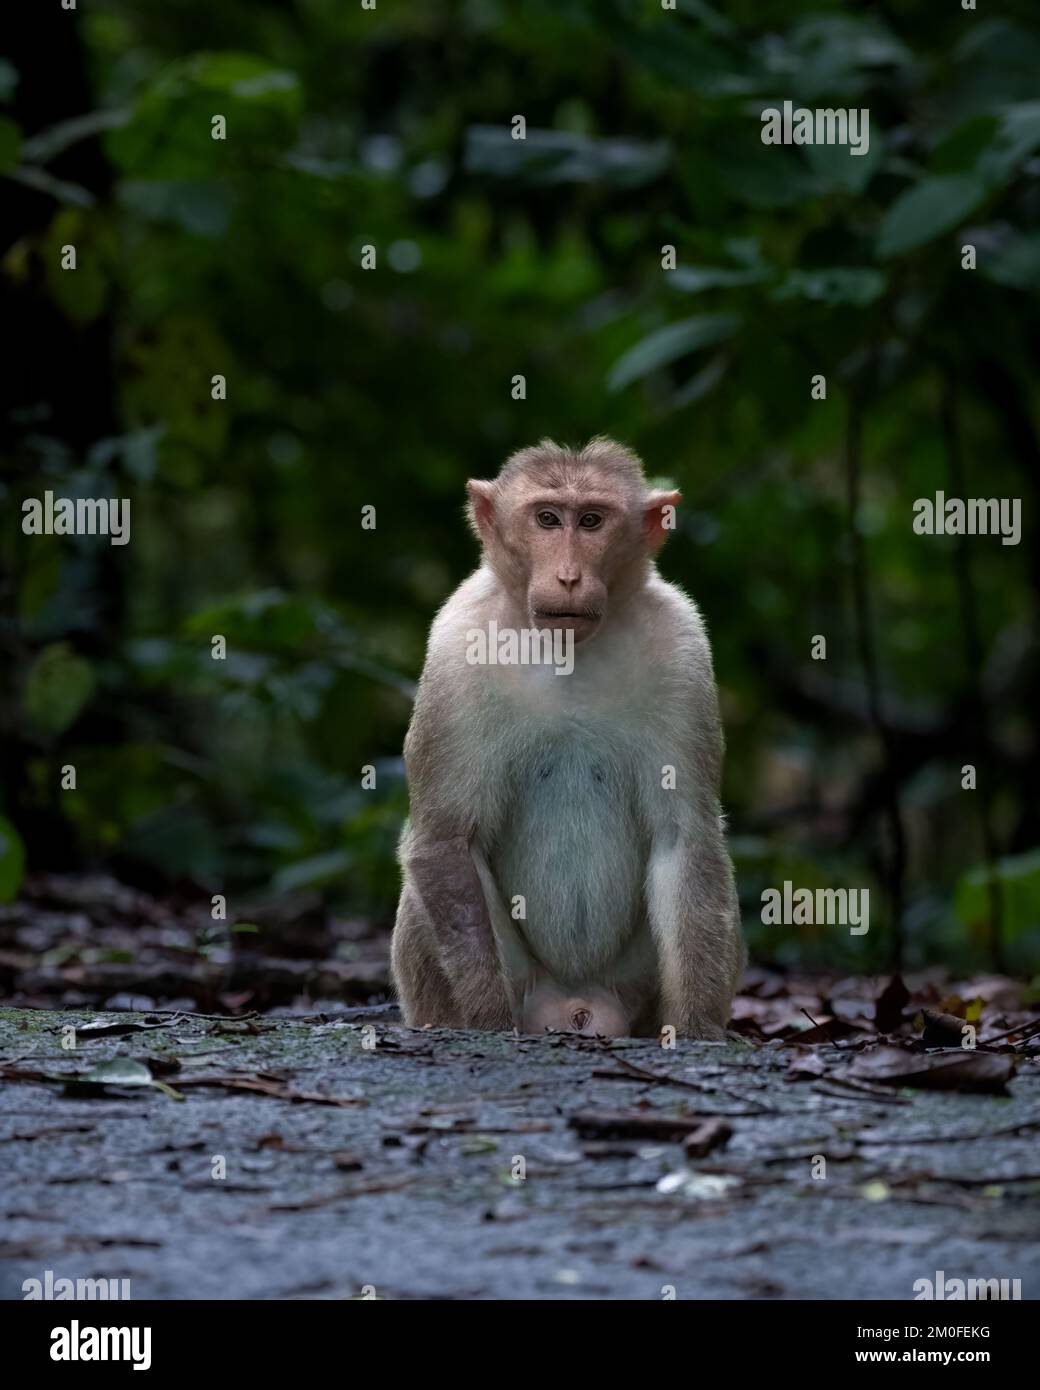 A Bonnet macaque (Macaca radiata) sitting on the side of the road at Bondla wildlife sanctuary in Goa, India. They are also known as Zati and are ende Stock Photo